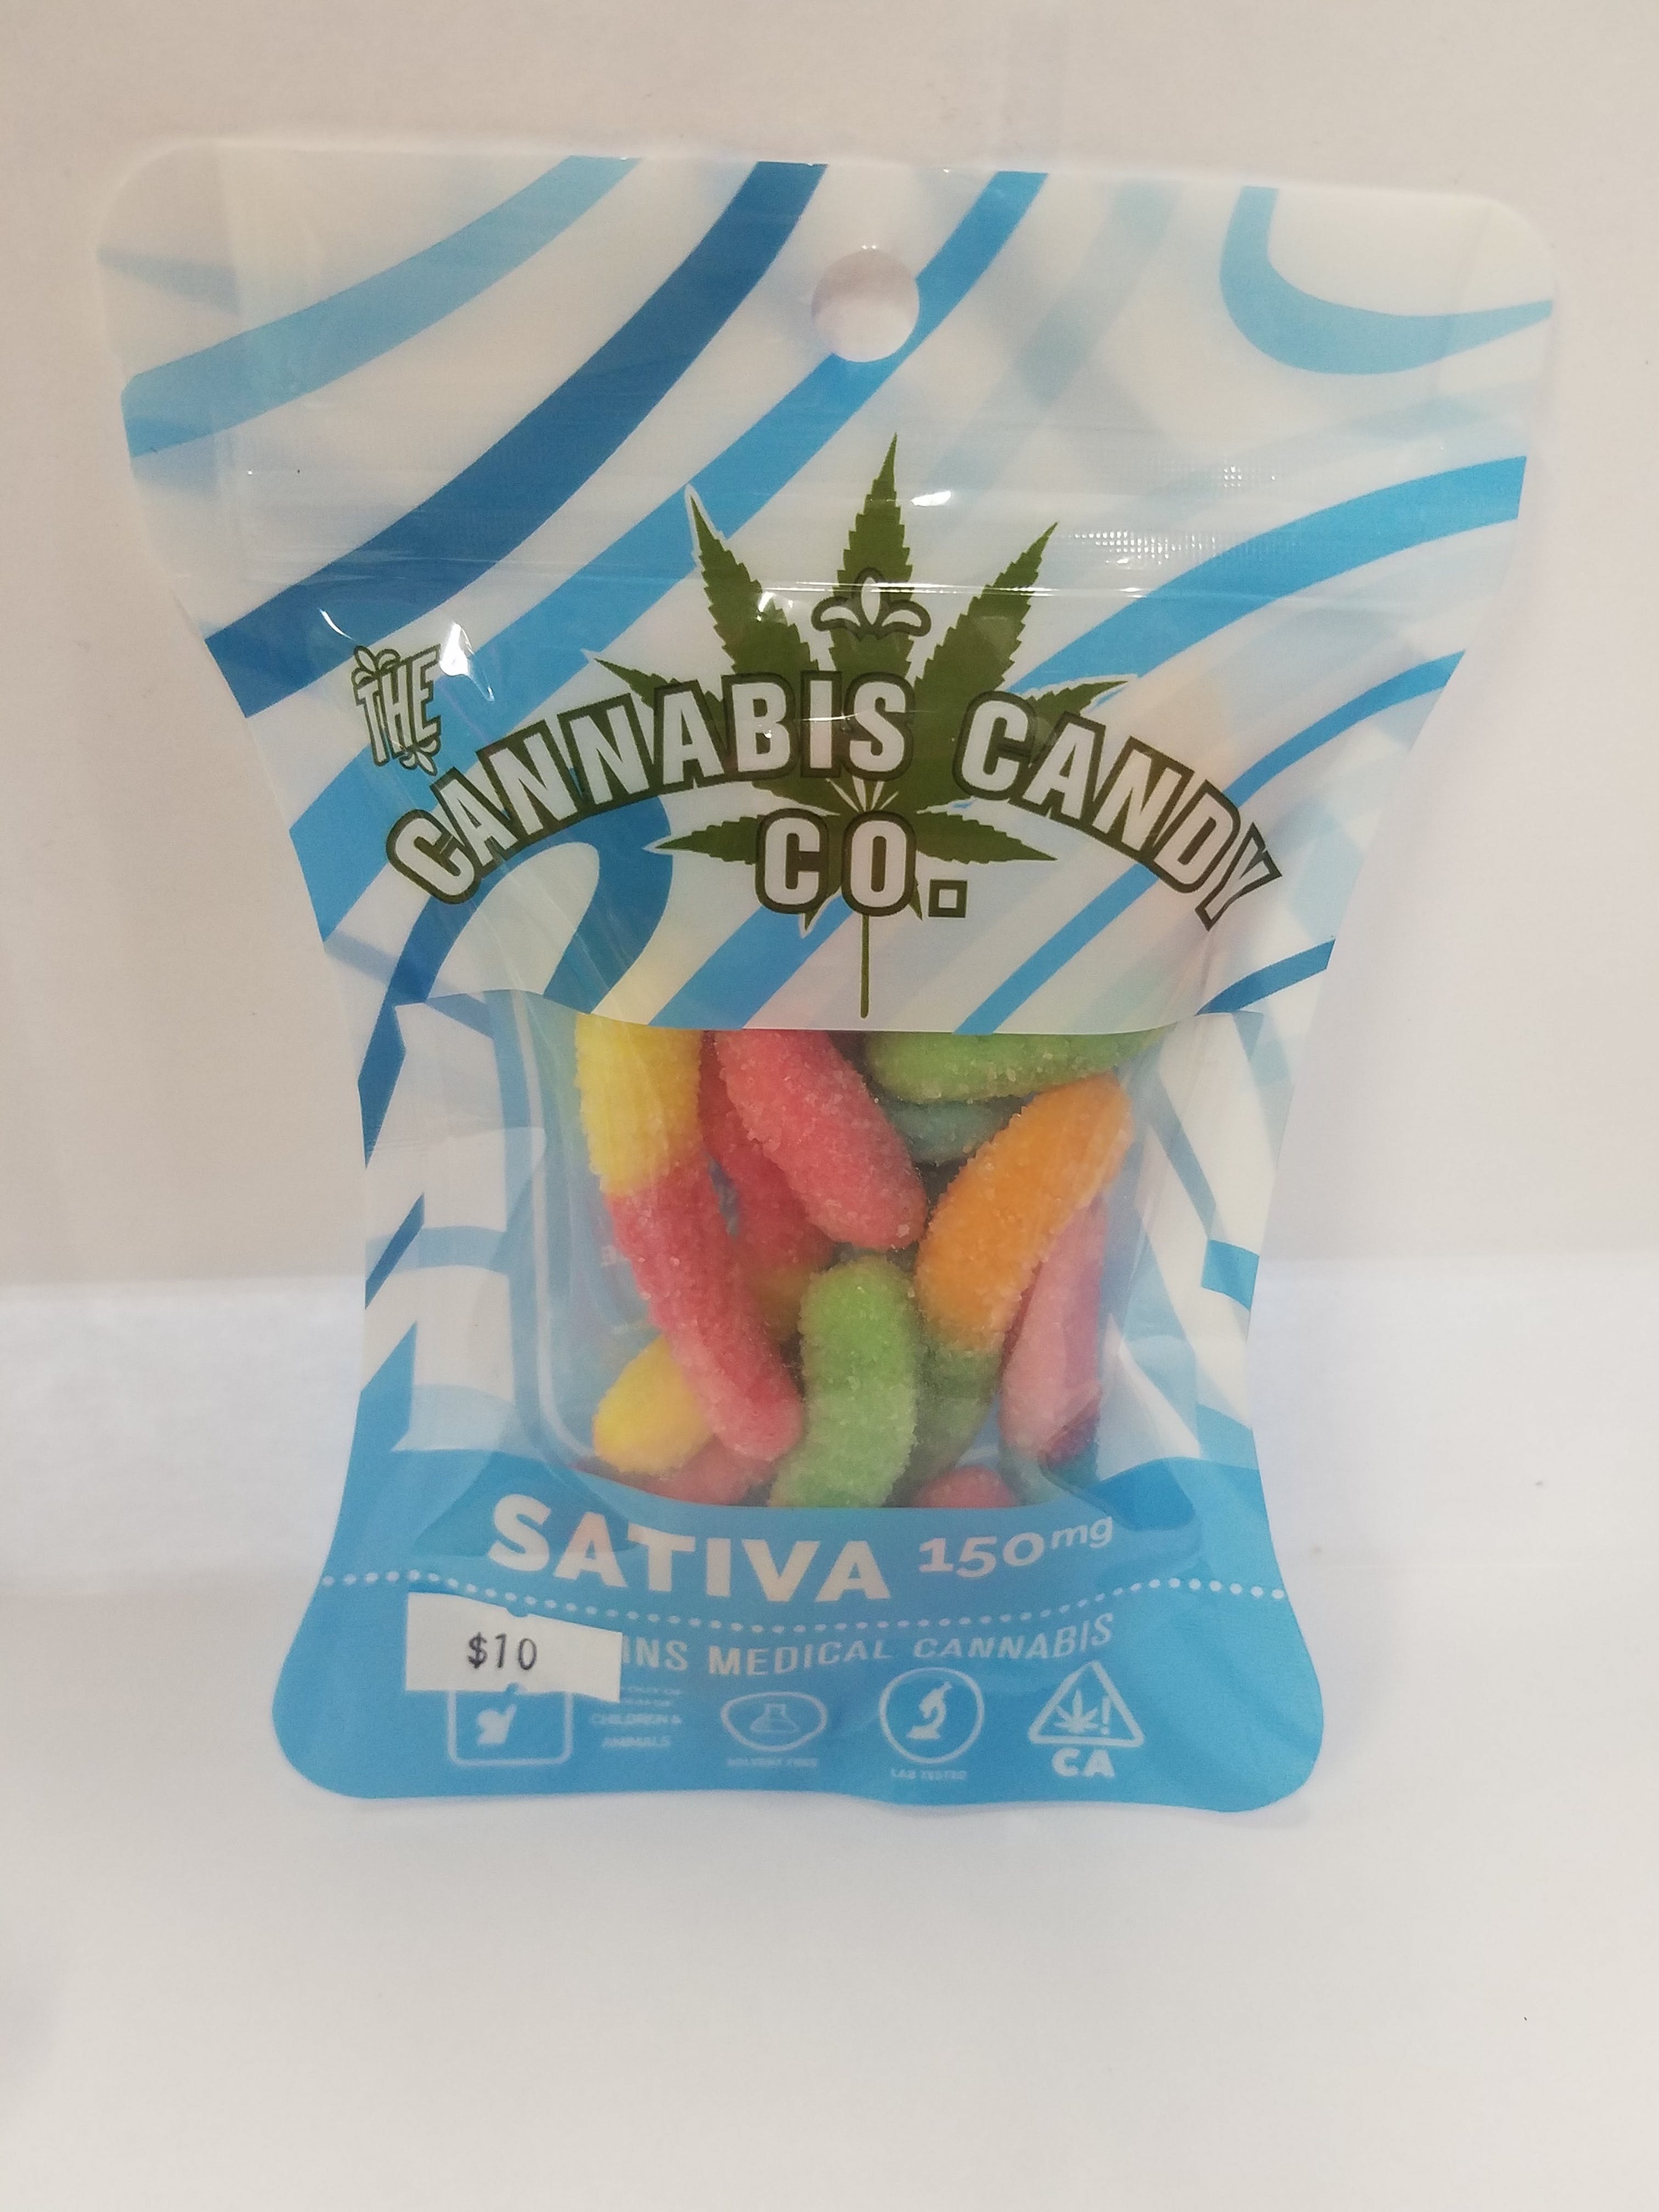 edible-the-cannabis-candy-co-sour-gummy-worms-150mg-sativa